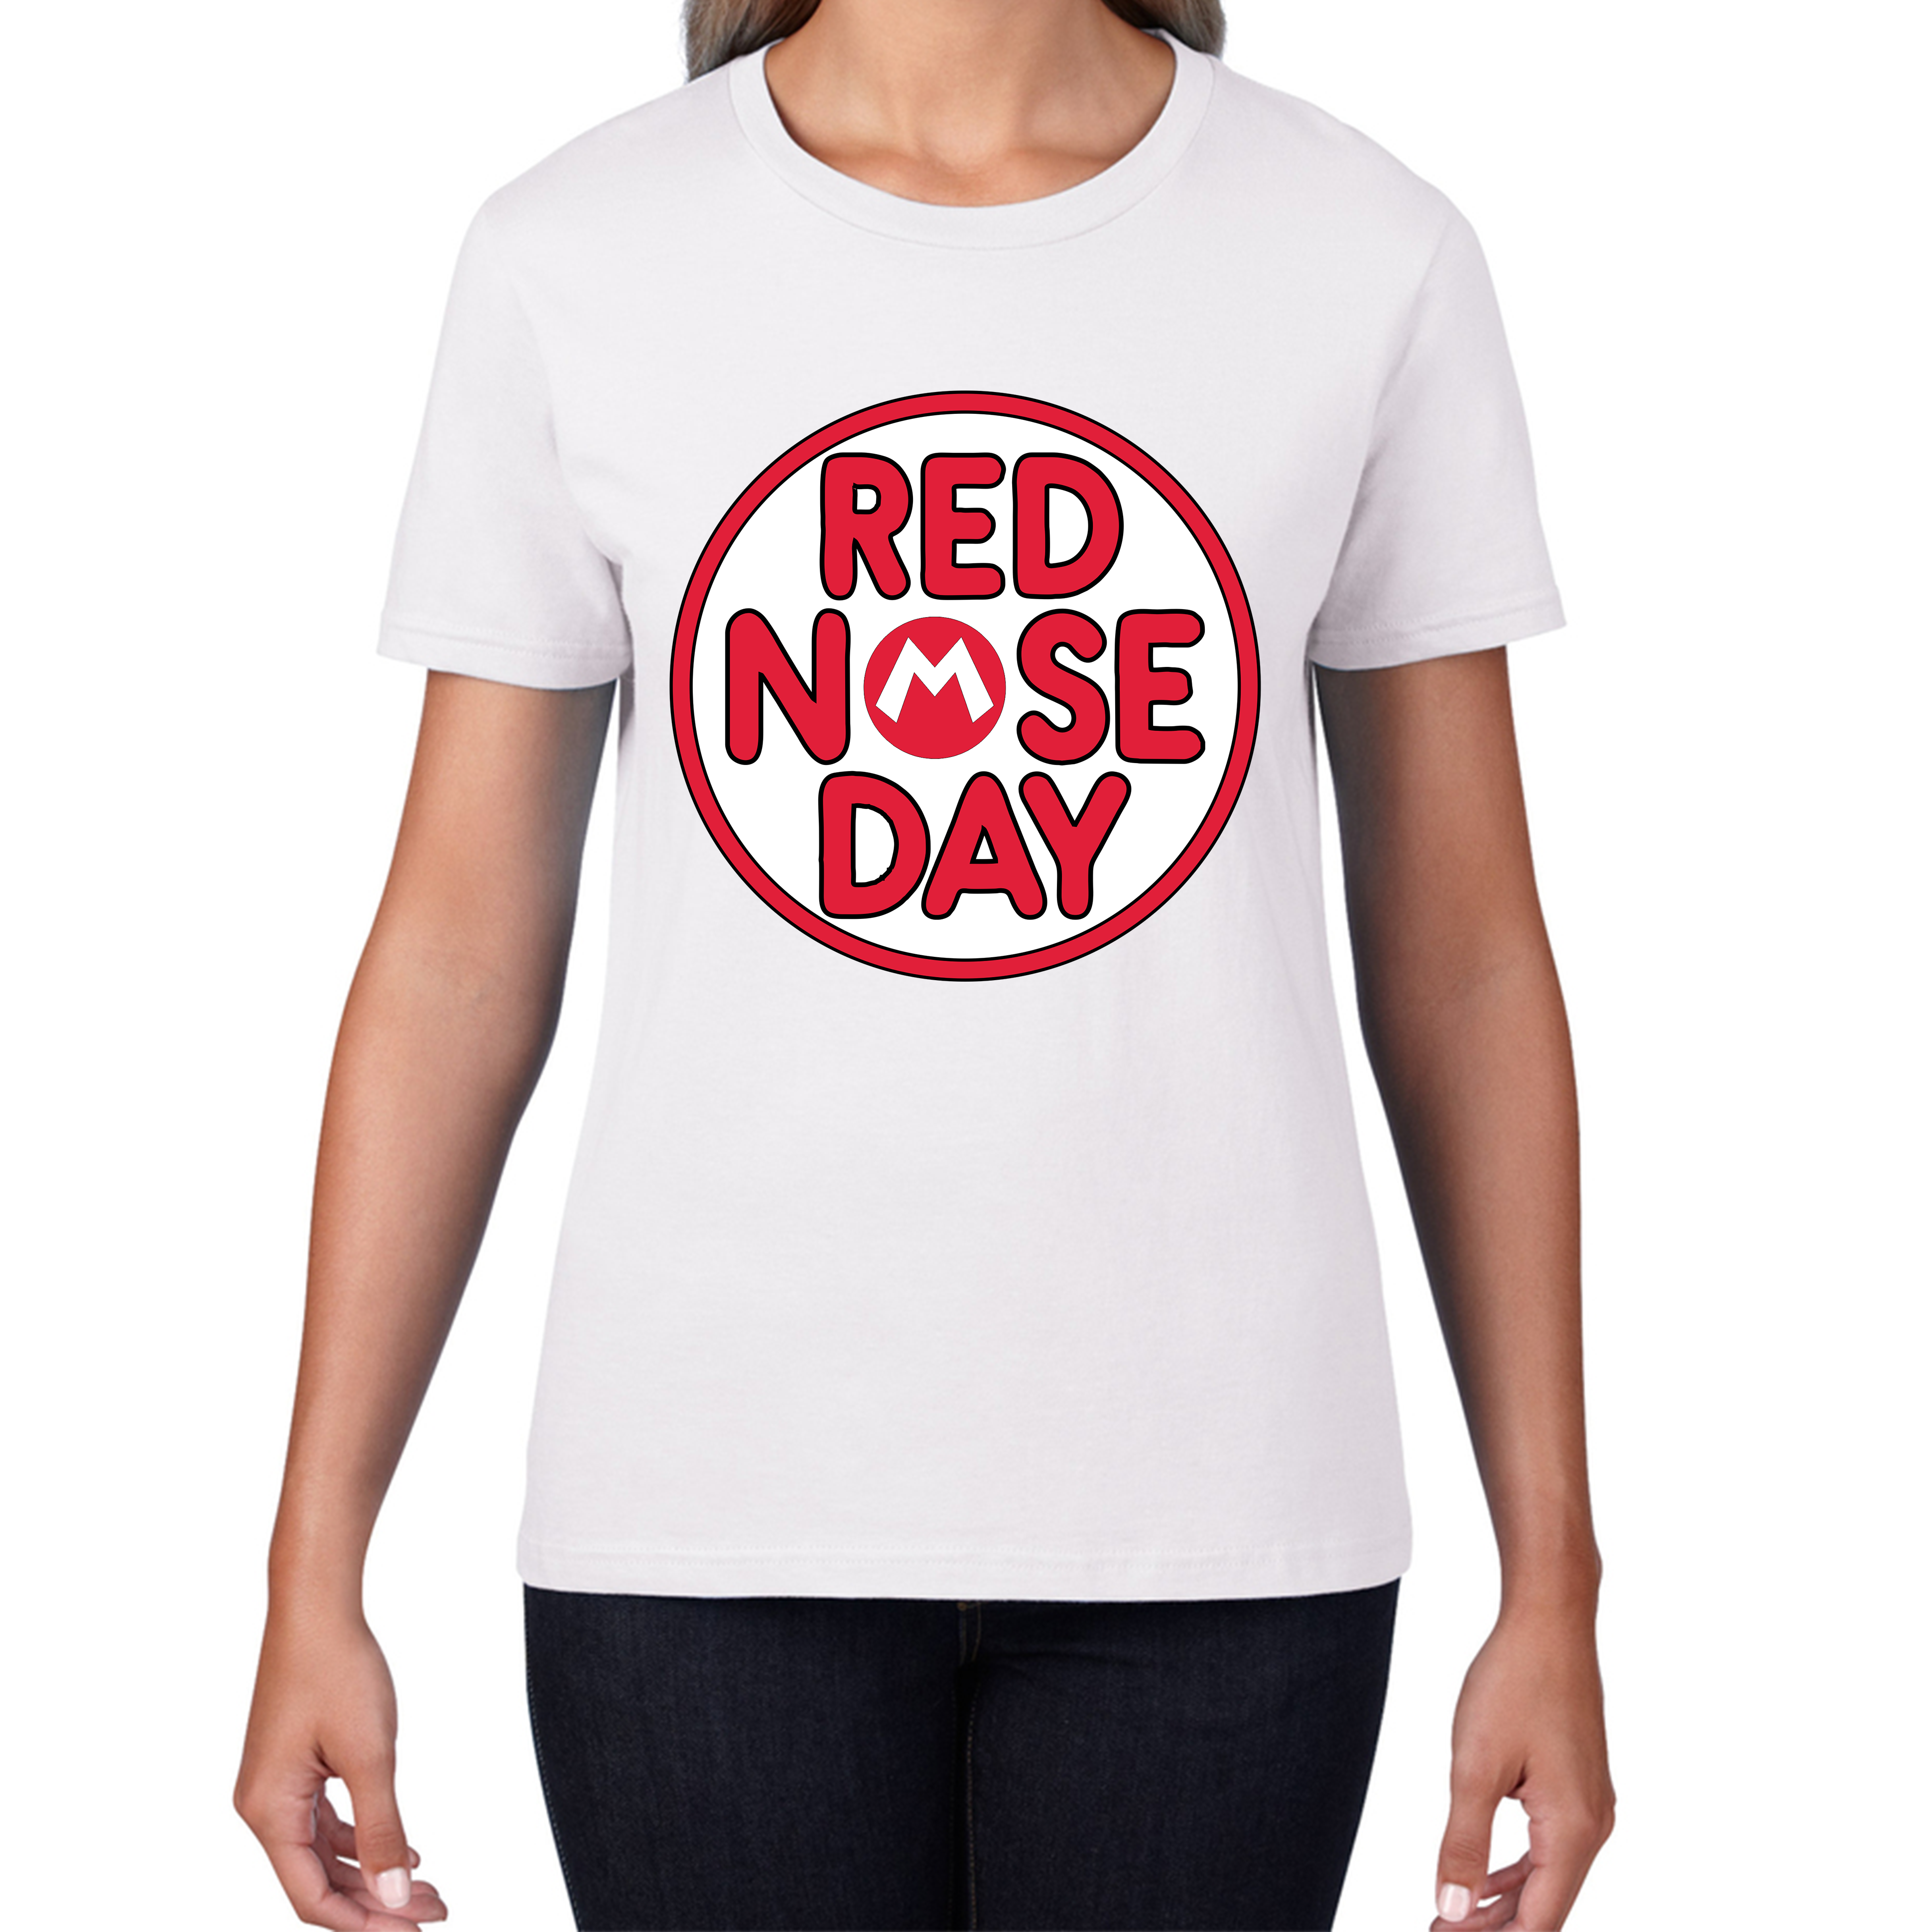 Super Mario Red Nose Day Ladies T Shirt. 50% Goes To Charity